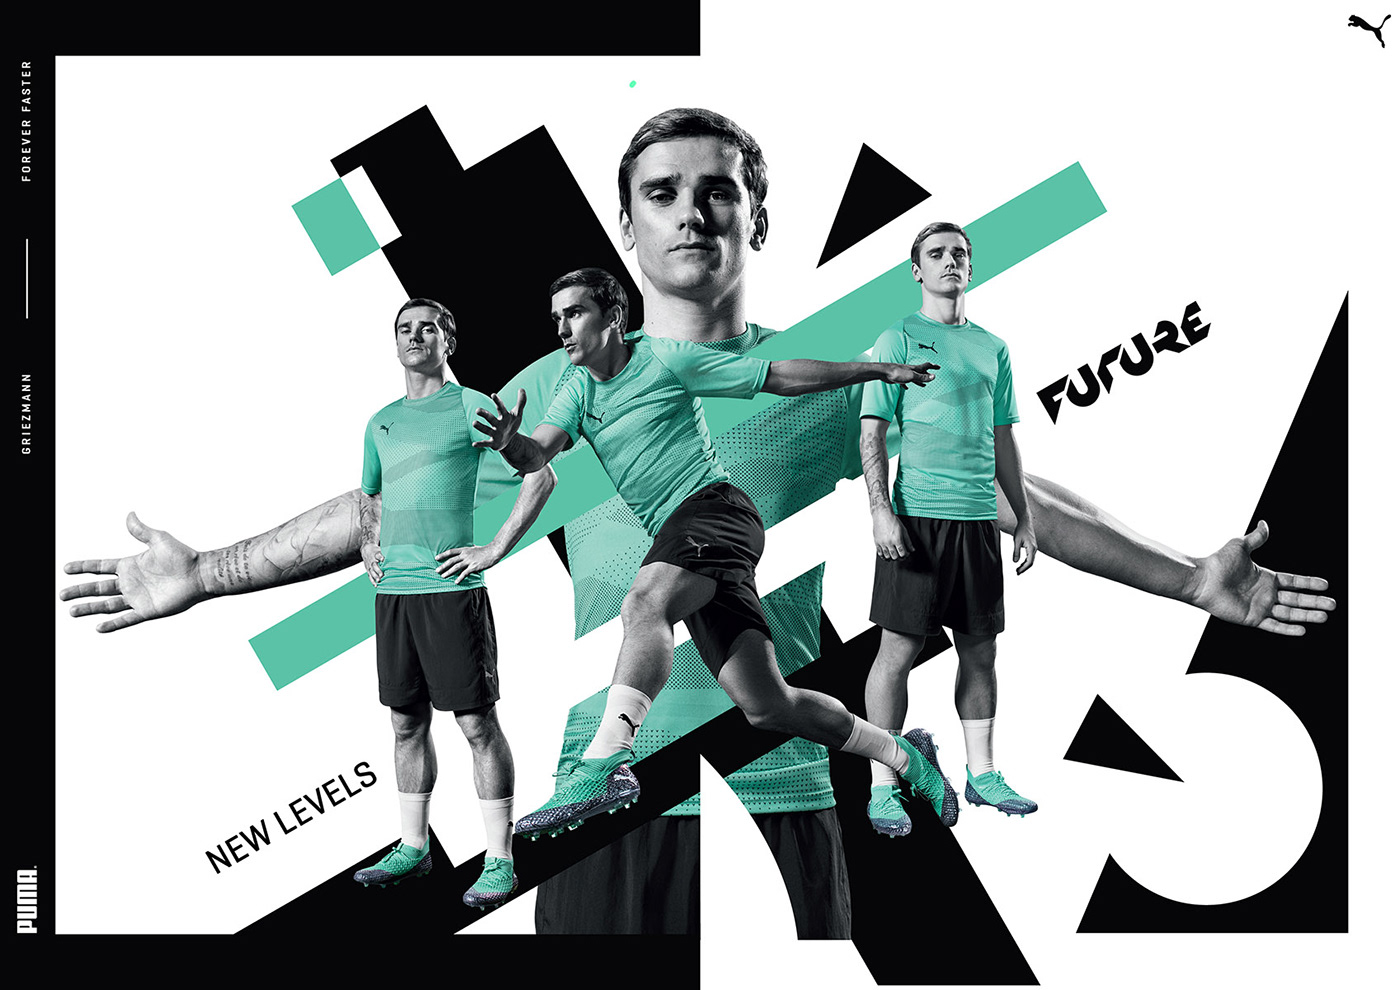 puma WorldCup soccer football Photography  sport graphic design  russian constructivism poster